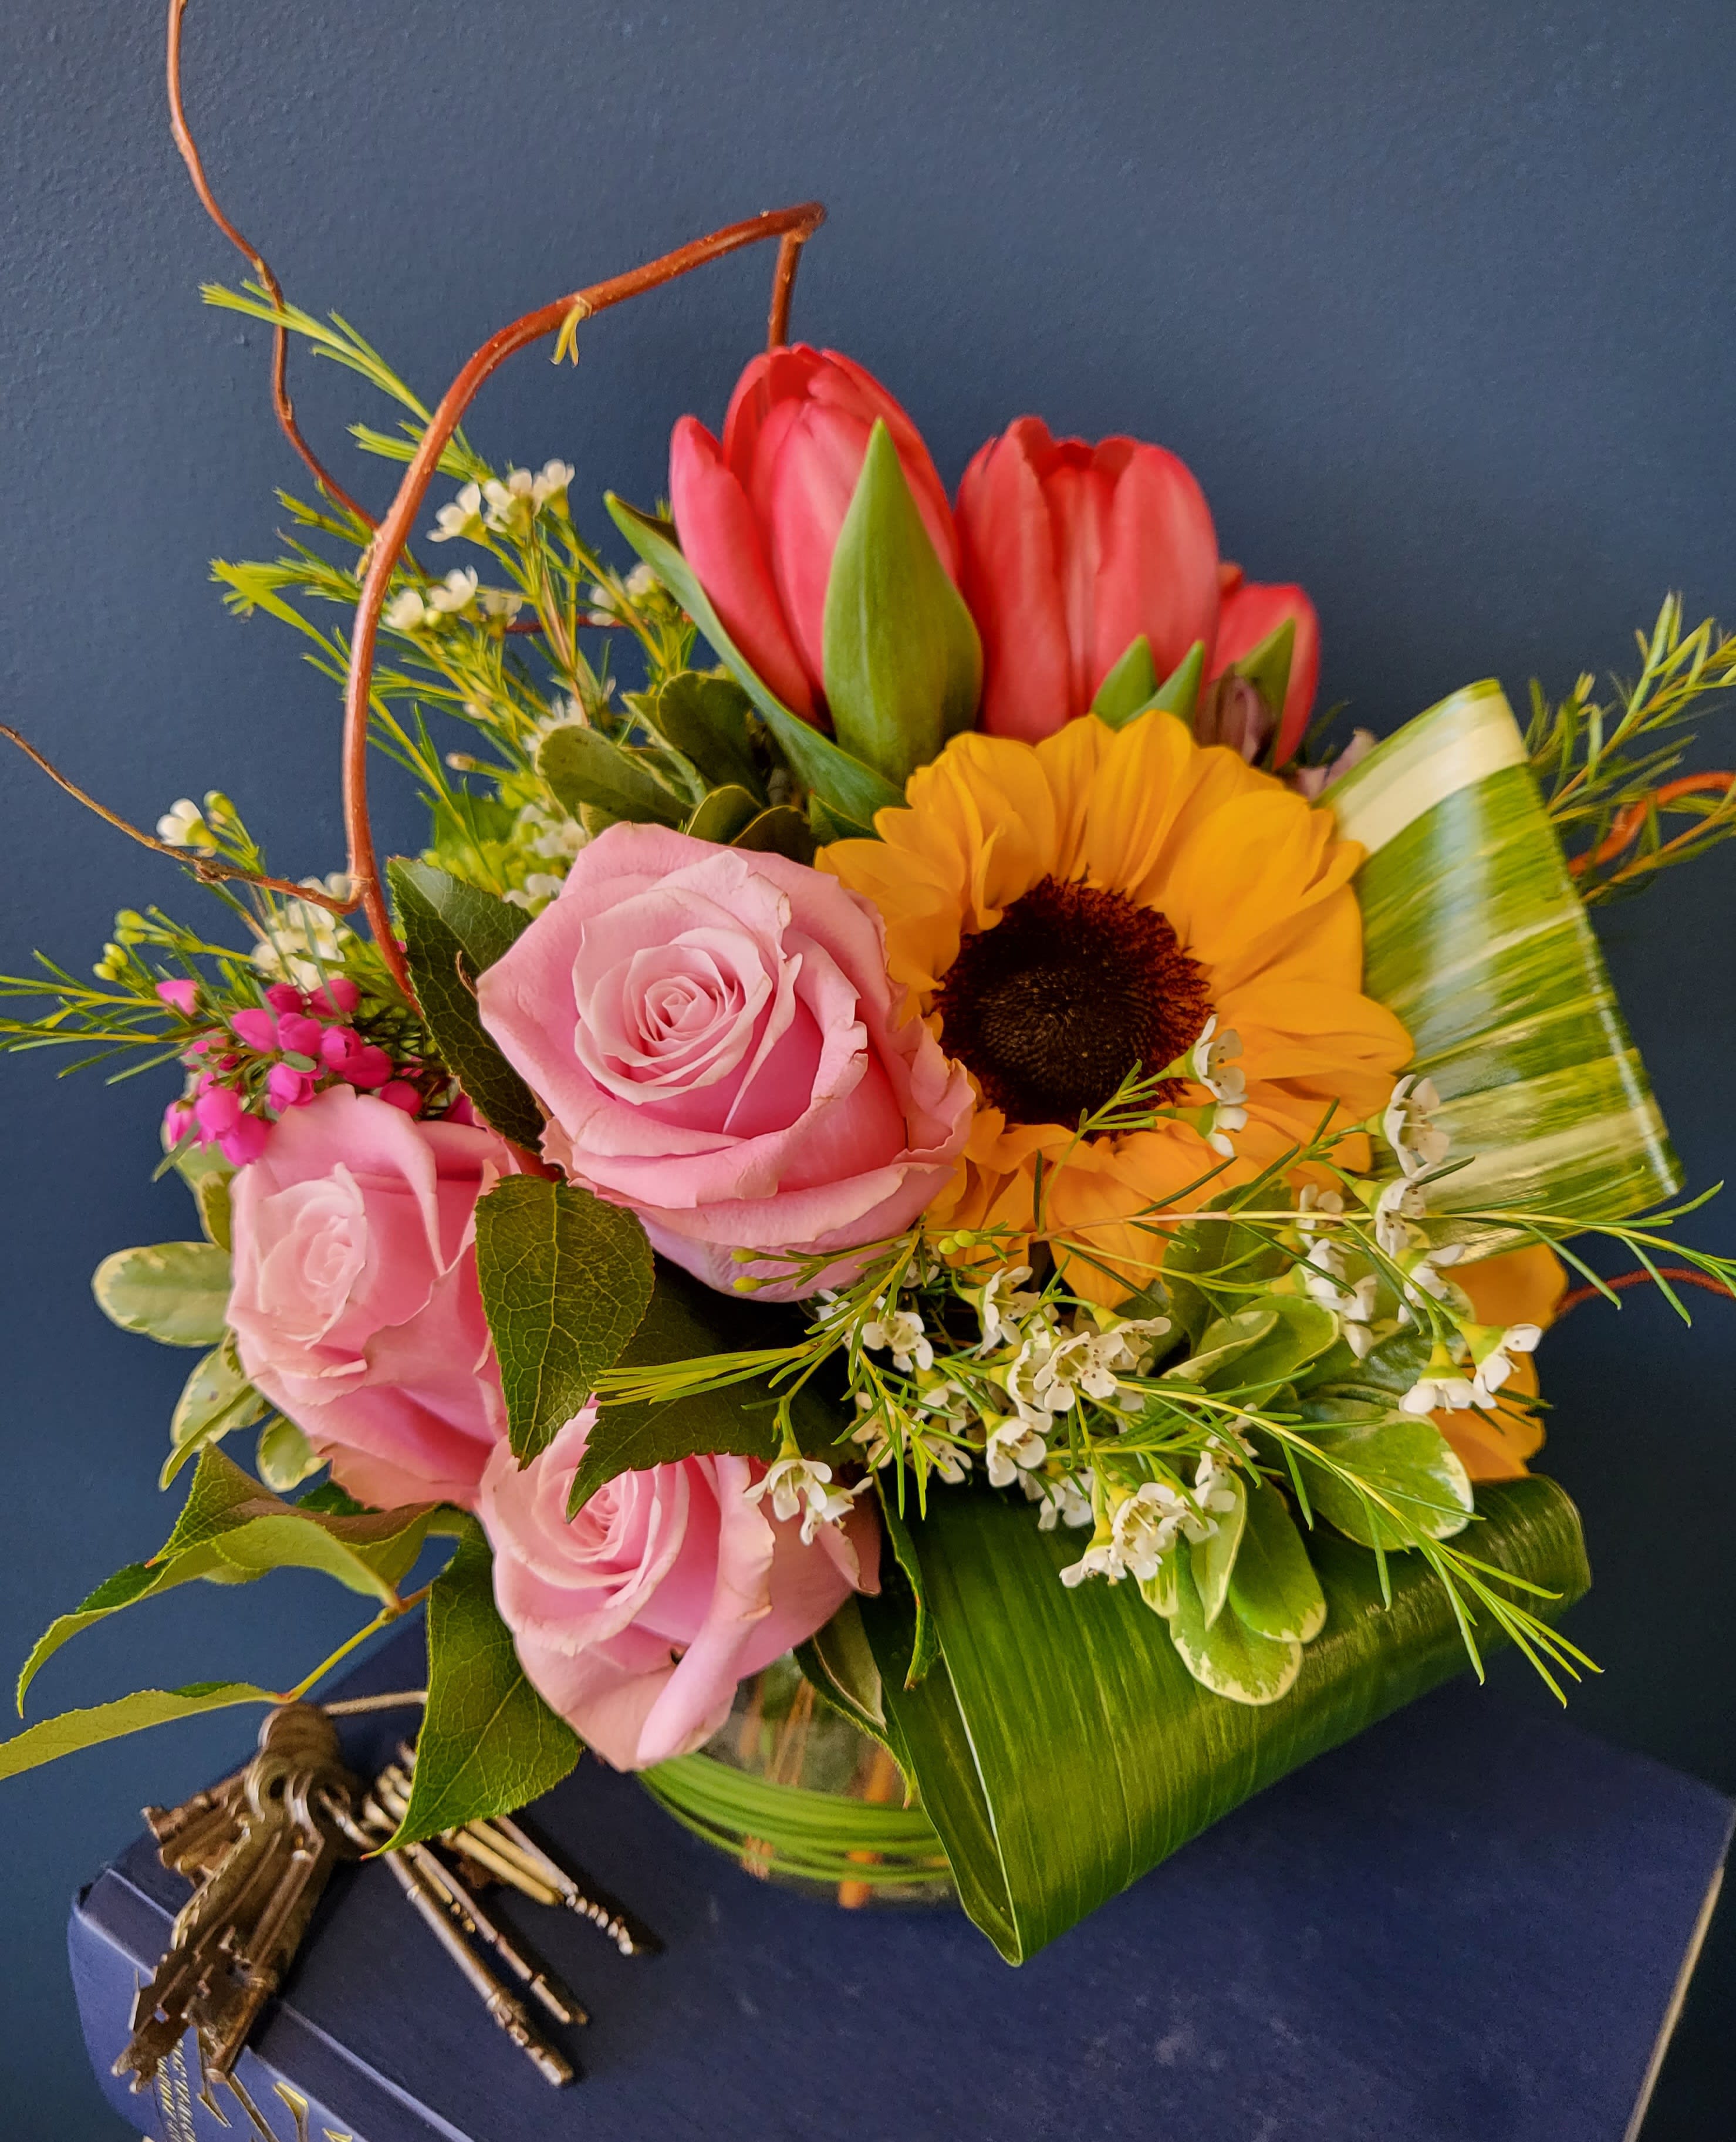 April - This arrangement features the best &amp; most popular flowers of spring blended together in a bubble bowl. This is the perfect arrangement for the season to add to any table, counter, or desk.  Sunflowers, tulips, and roses combined to create the best corroboration of spring colors.